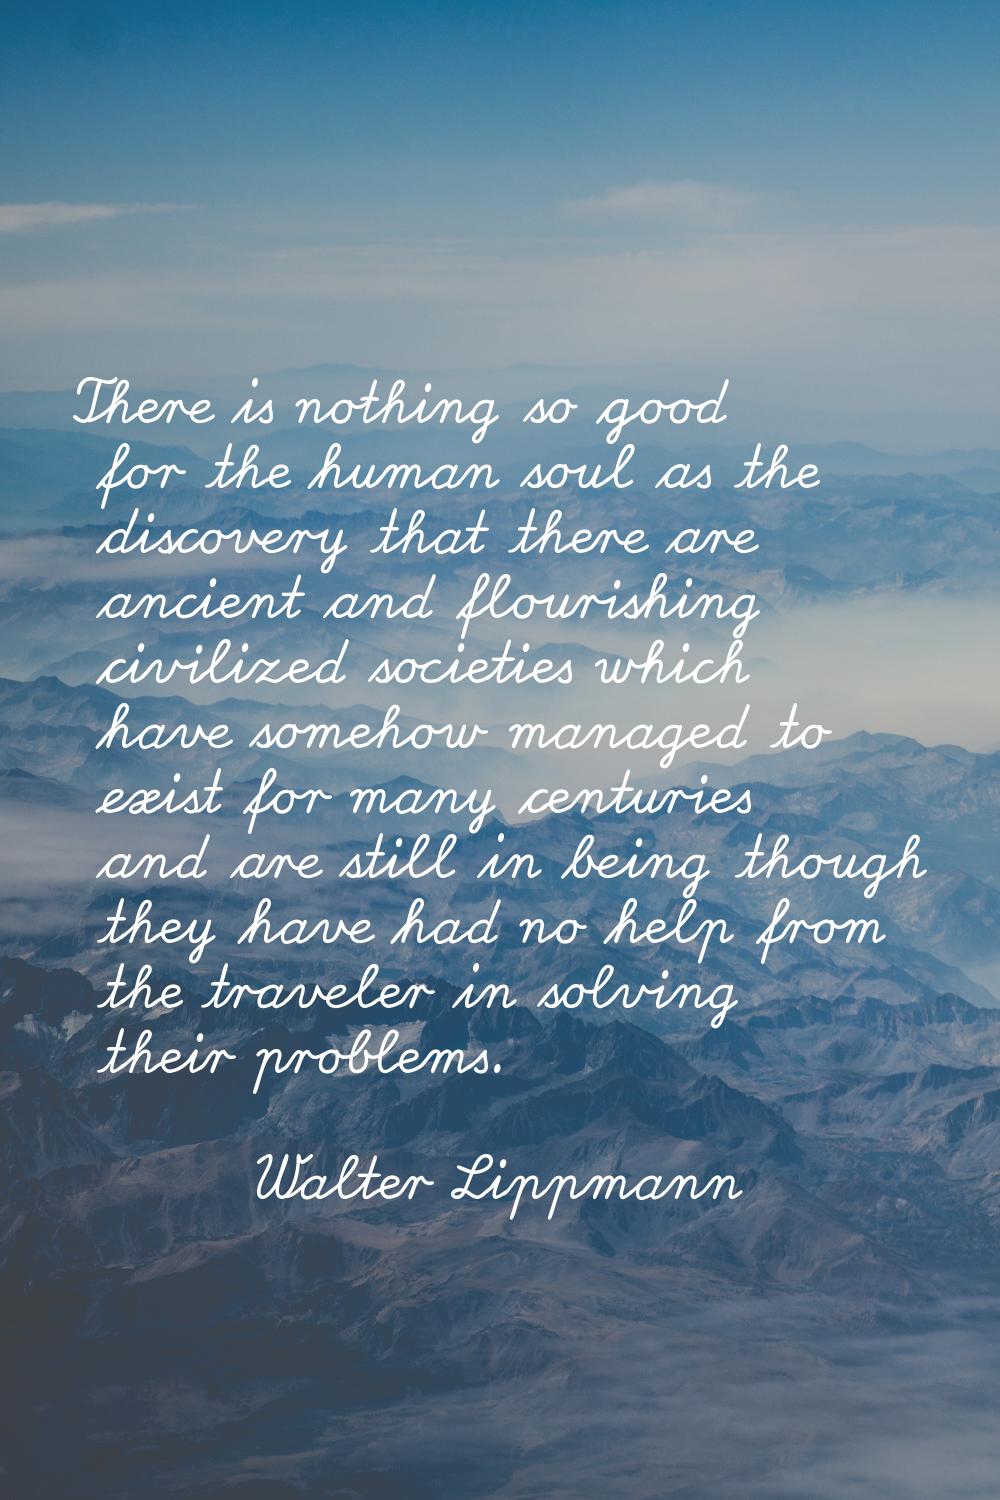 There is nothing so good for the human soul as the discovery that there are ancient and flourishing